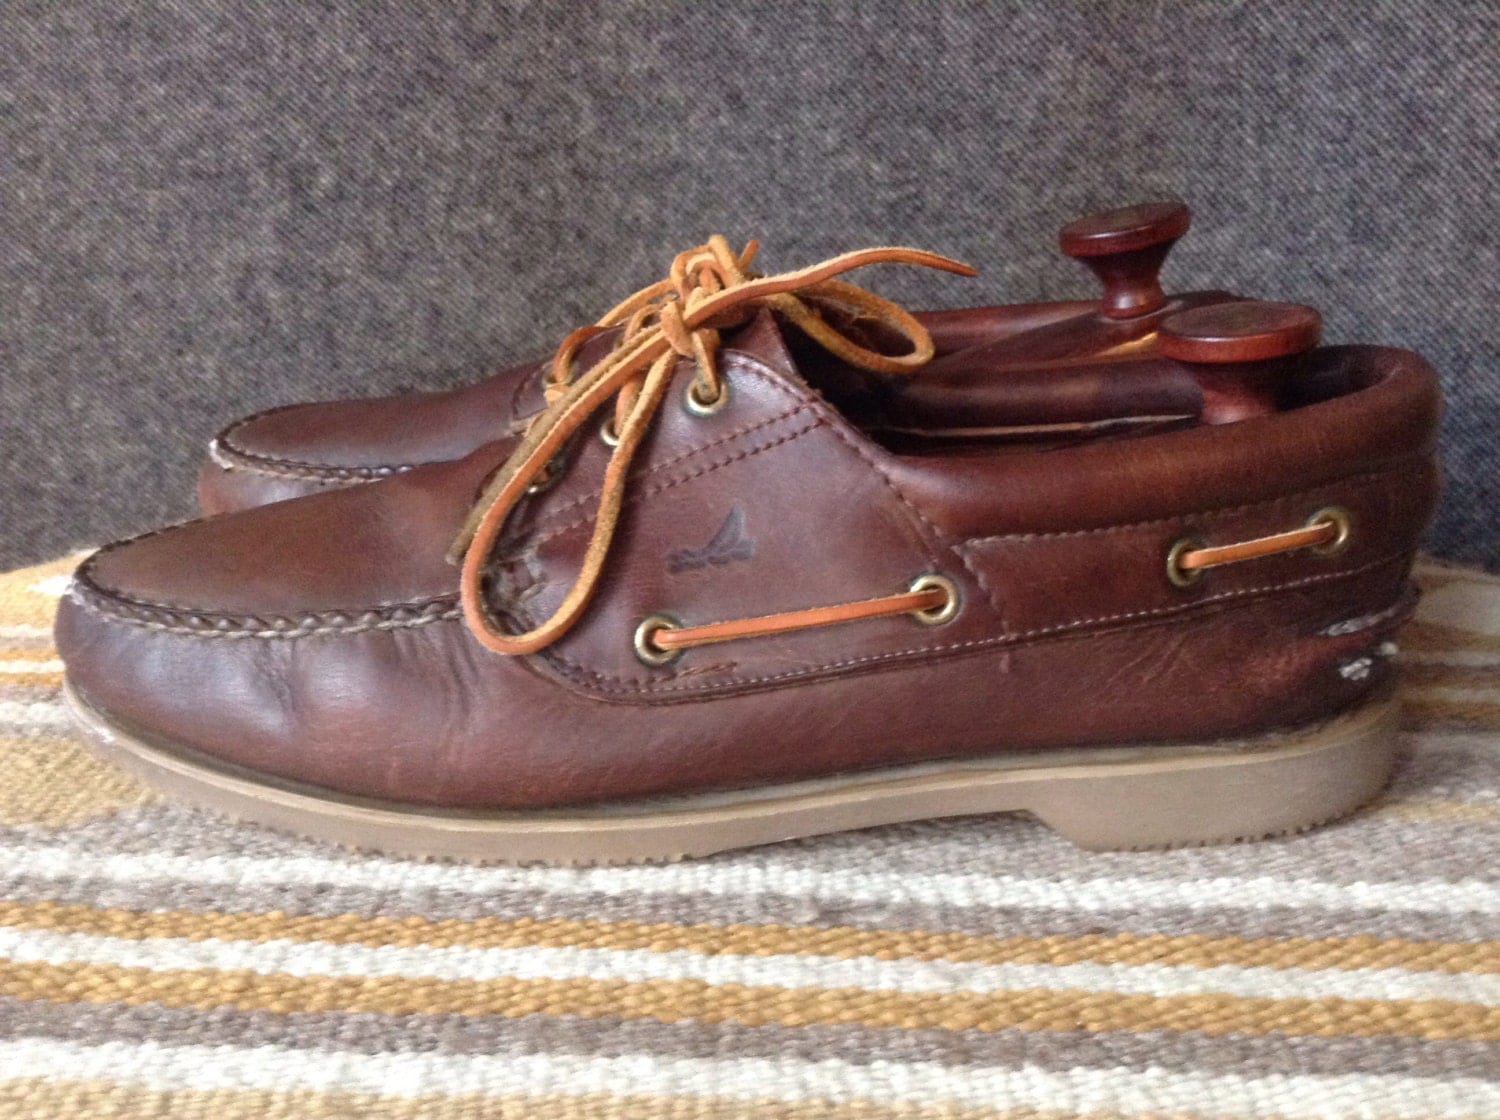 Vintage Sperry Top-Sider leather boat shoes USA 10.5